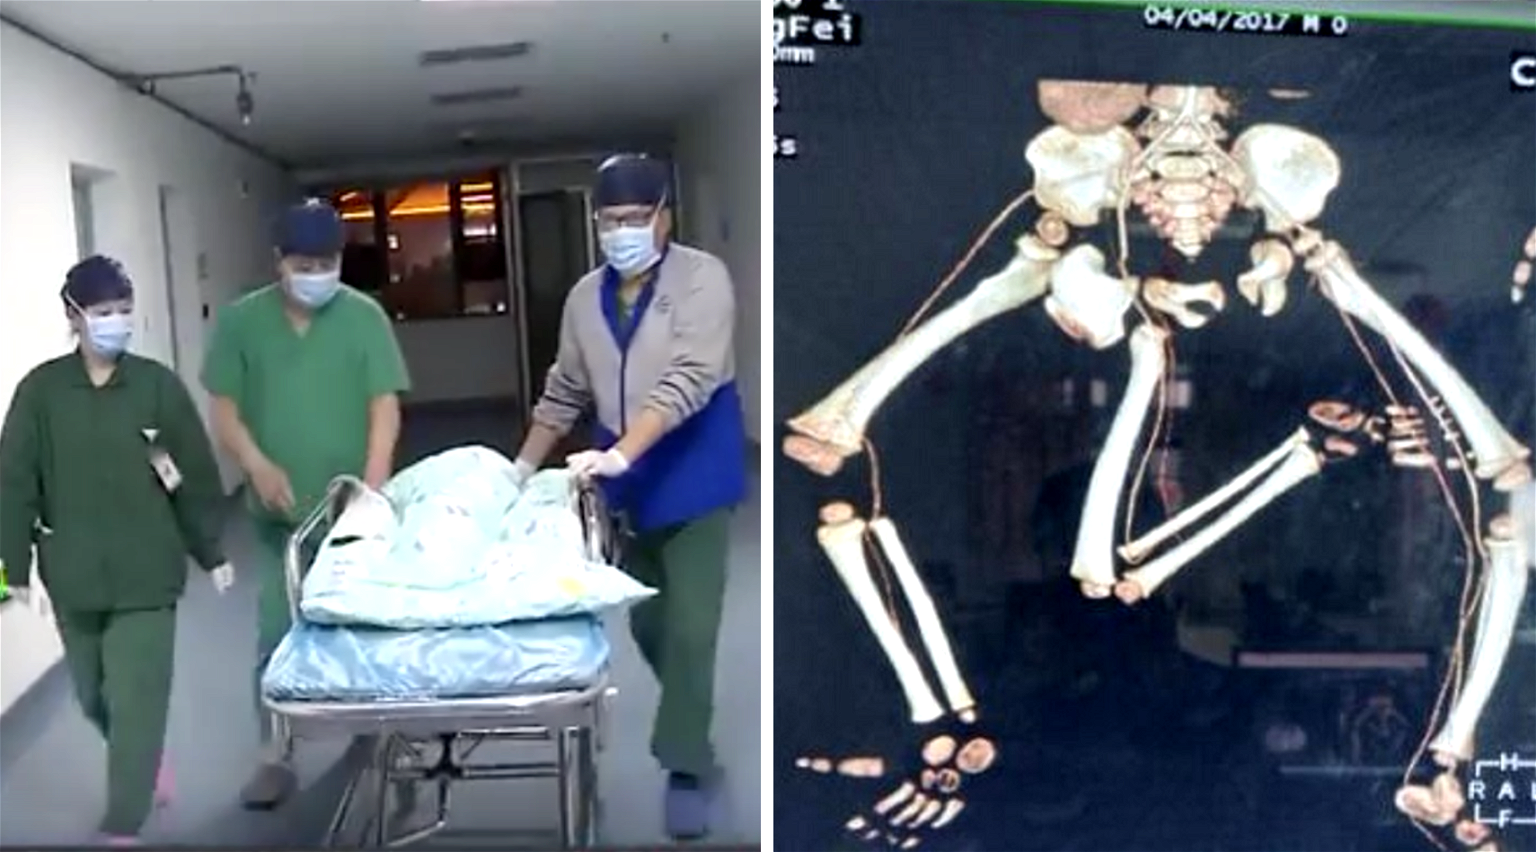 Baby Born With Three Legs Undergoes Complex 10-Hour Surgery in China